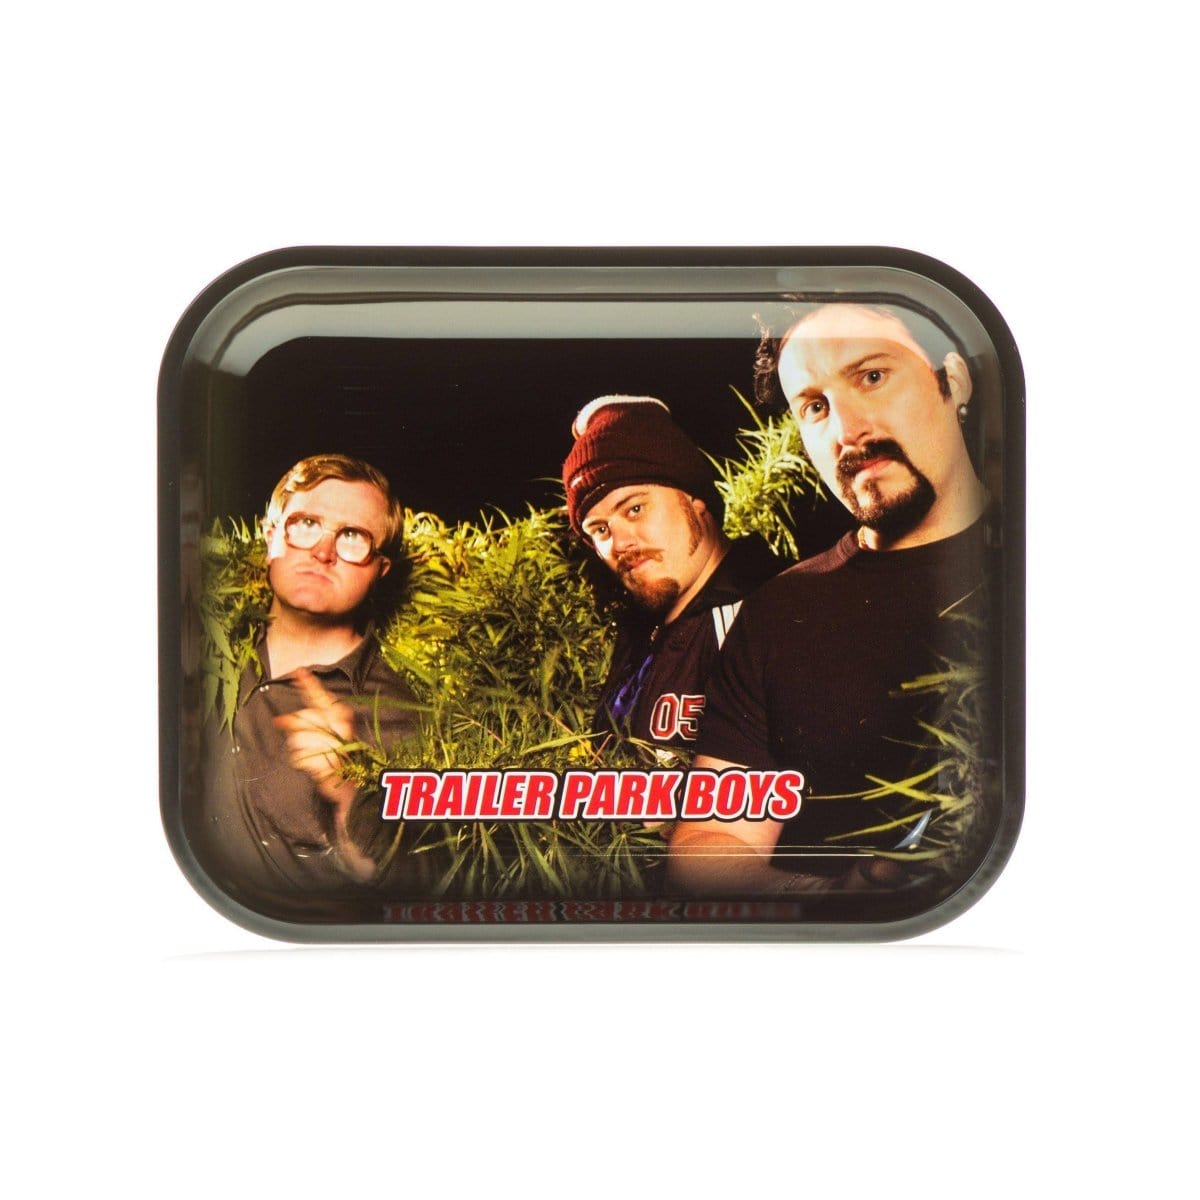 Trailer Park Boys Rolling Tray Large Clippings Rolling Tray